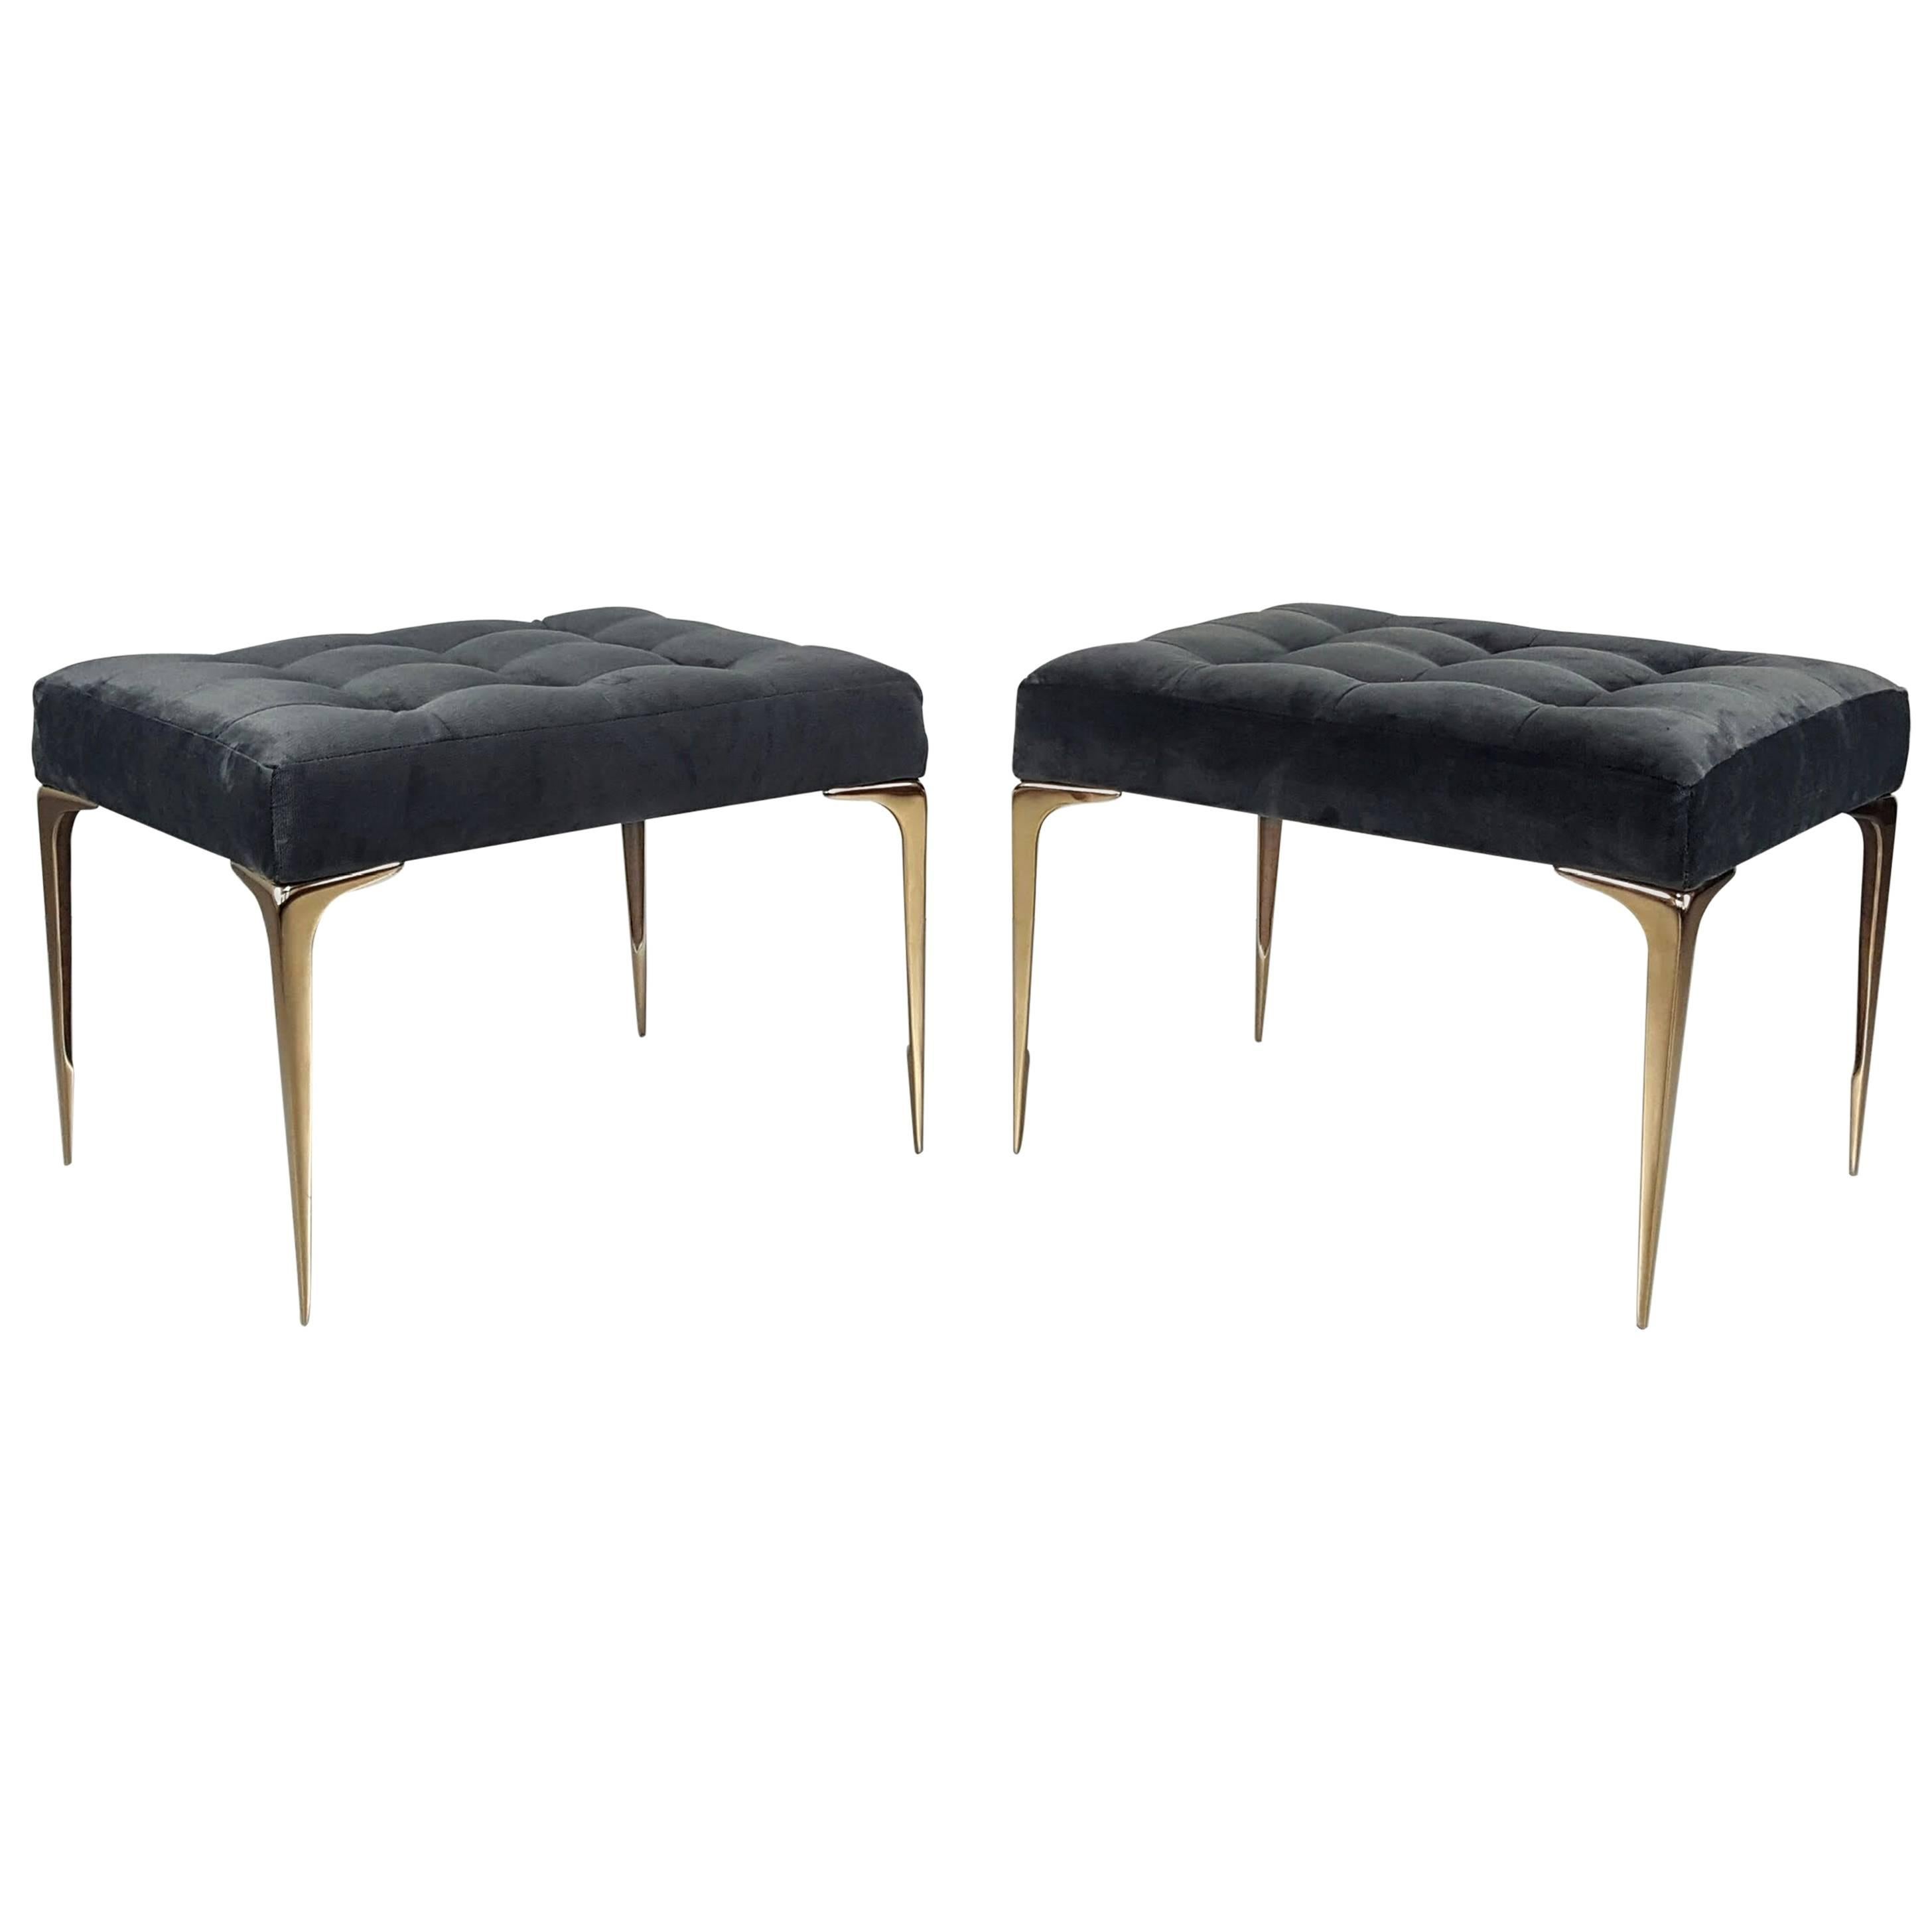 Lancia Italian Modern Ottomans or Benches with Solid Bronze Tapered Legs, a pair